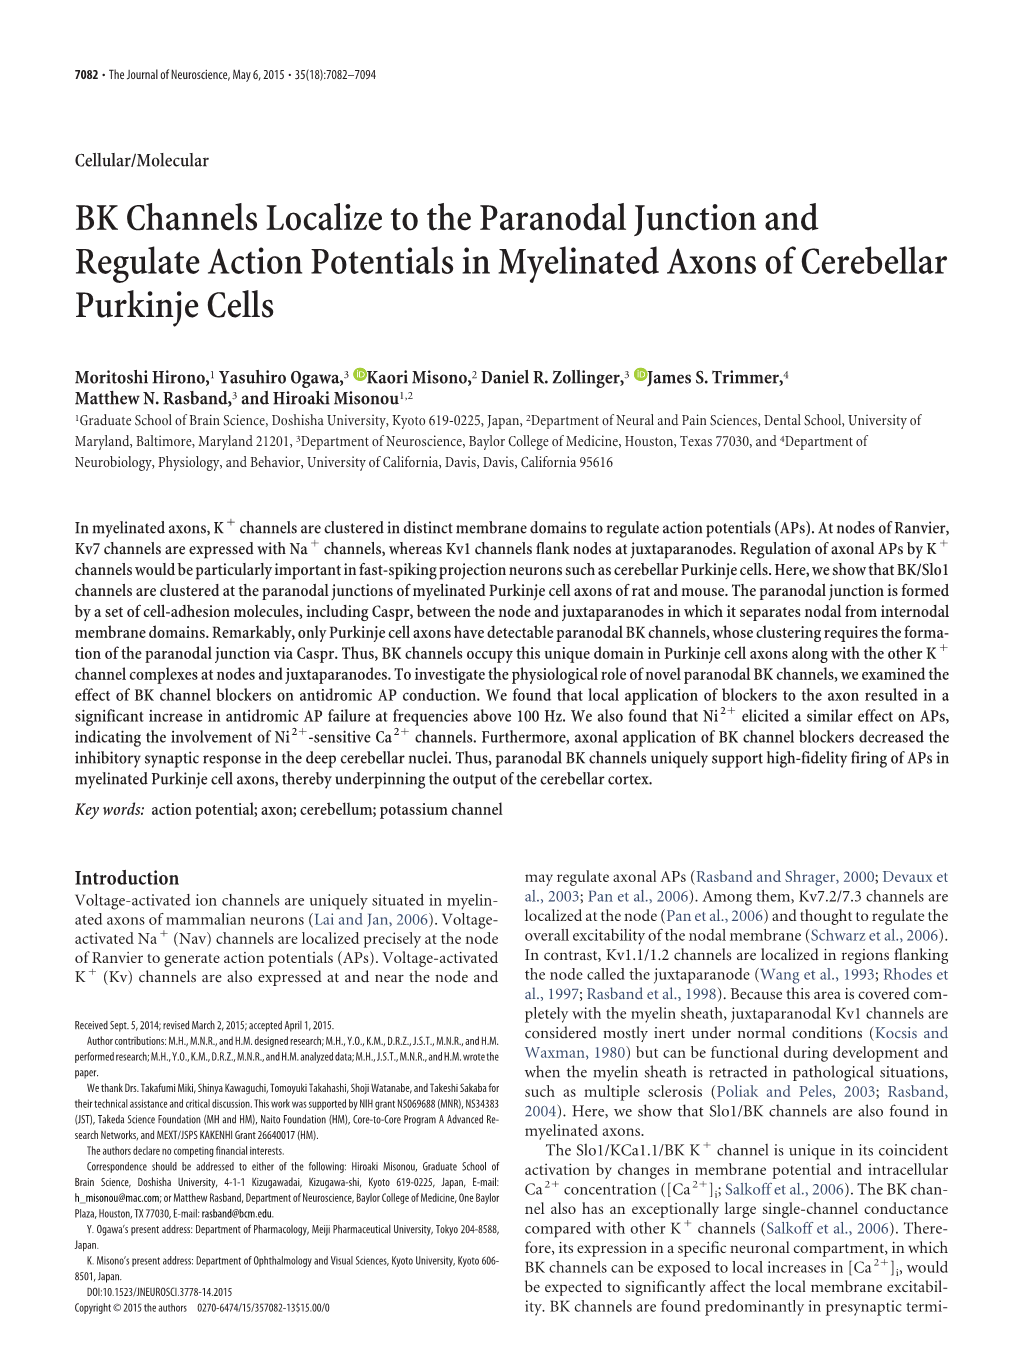 BK Channels Localize to the Paranodal Junction and Regulate Action Potentials in Myelinated Axons of Cerebellar Purkinje Cells